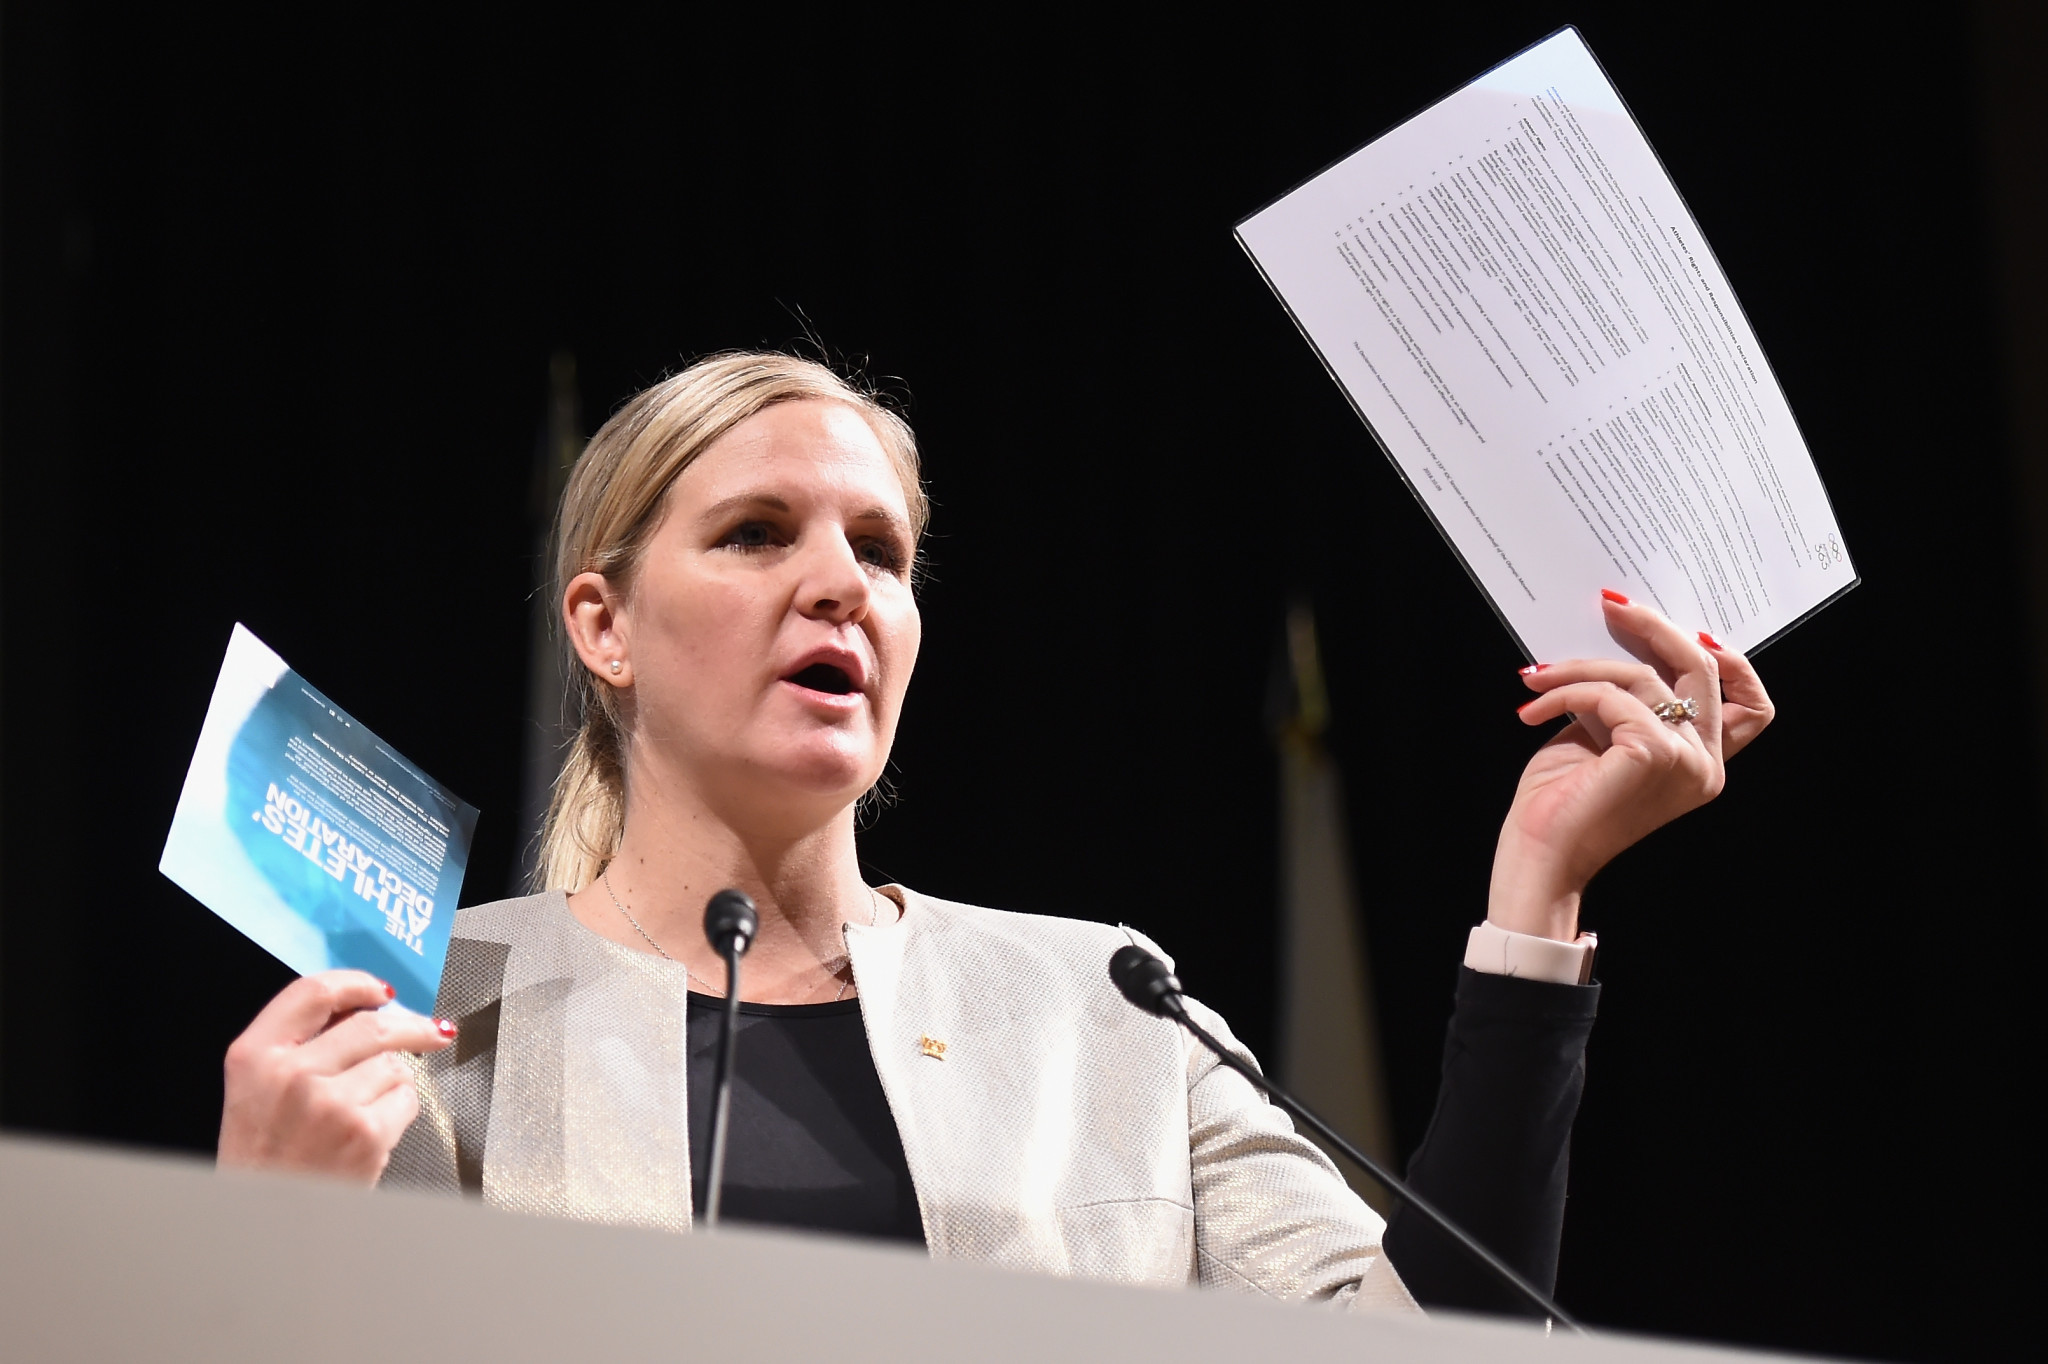 Chairperson Kirsty Coventry is among four departures from the IOC Athletes' Commission at Tokyo 2020 ©Getty Images